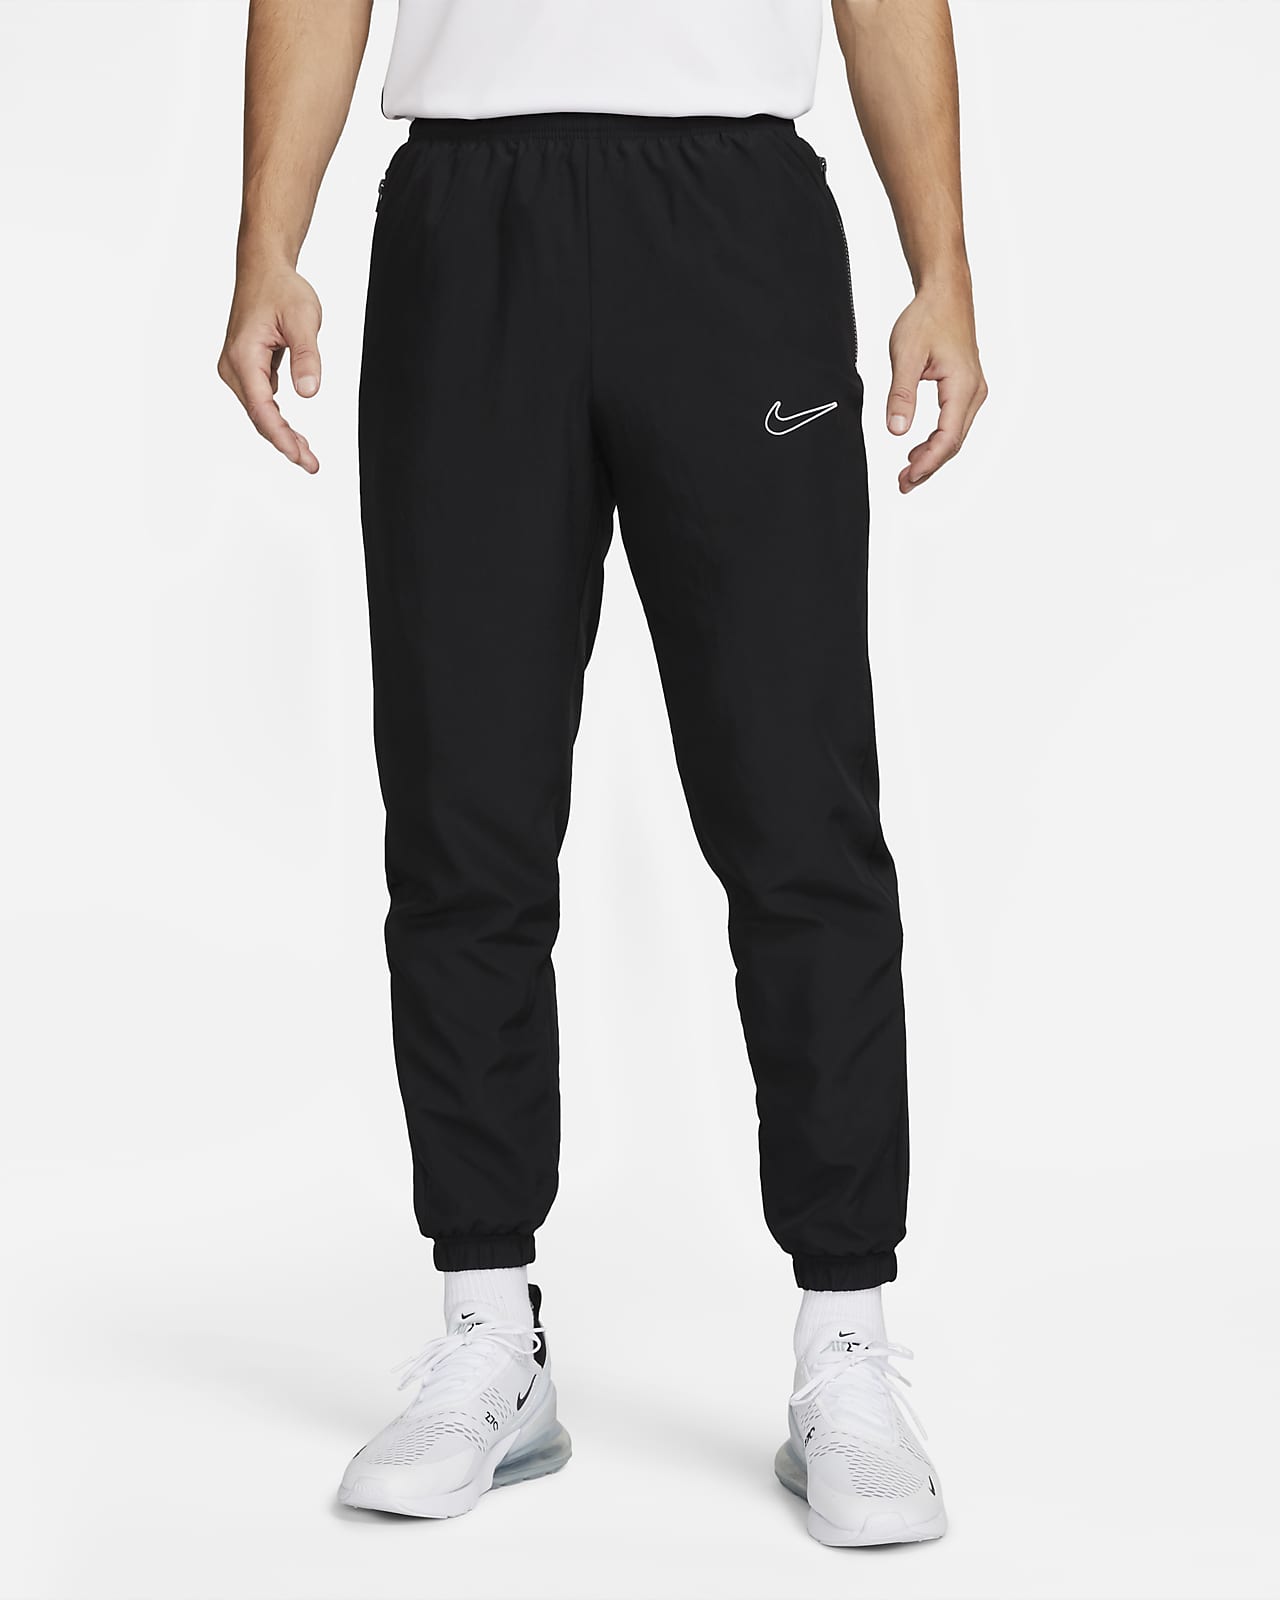 https://static.nike.com/a/images/t_PDP_1280_v1/f_auto,q_auto:eco/27651ad4-9c63-4e3c-934f-13aff367f92a/pants-de-f%C3%BAtbol-dri-fit-academy-NNW76R.png